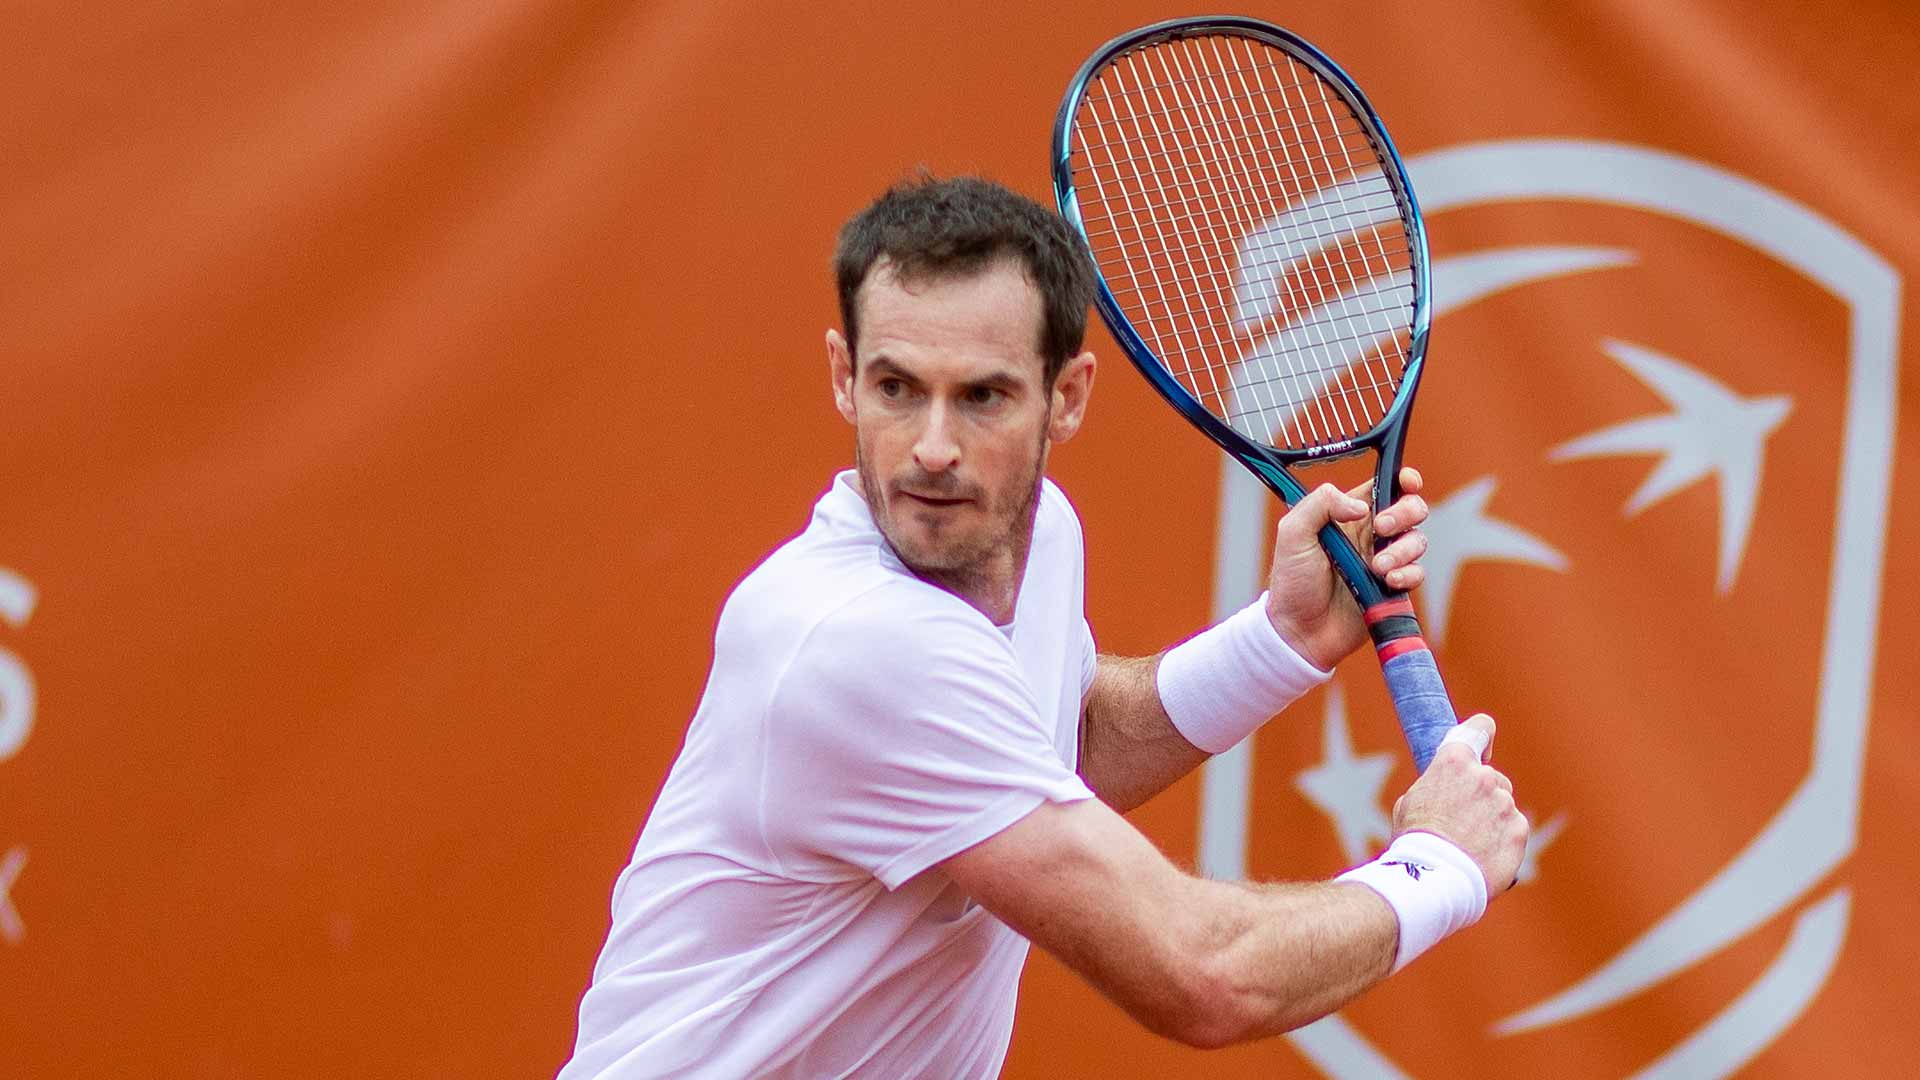 Andy Murray is in action this week at the BNP Paribas Primrose in Bordeaux, France.